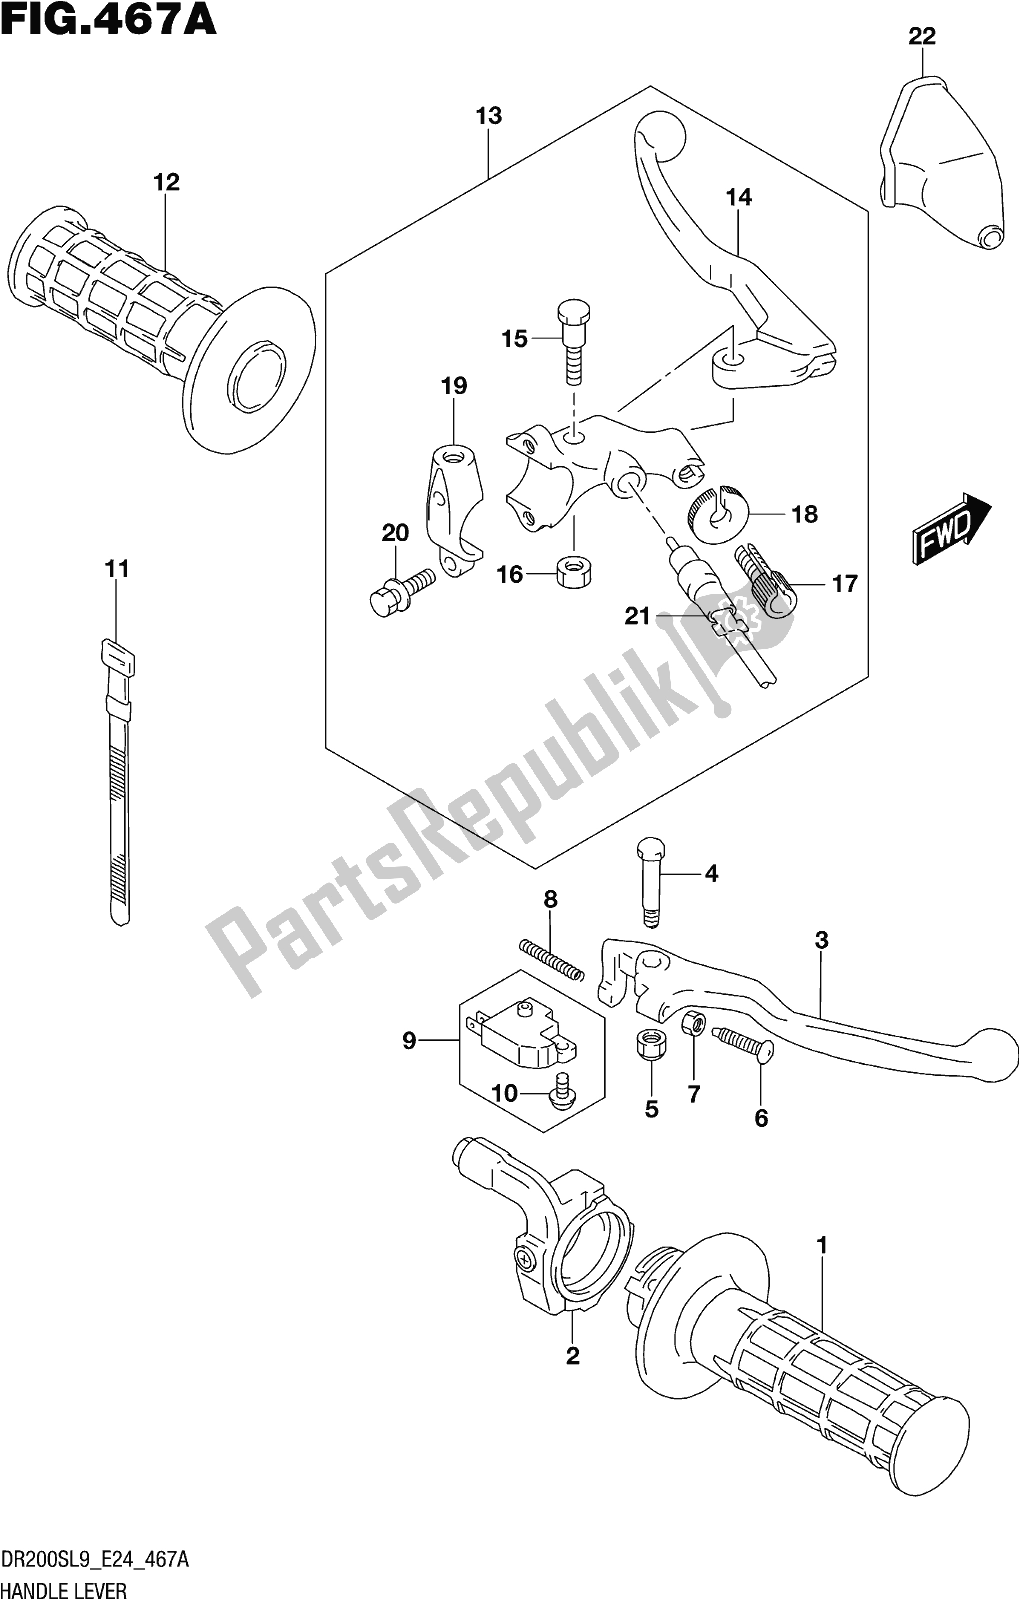 All parts for the Fig. 467a Handle Lever of the Suzuki DR 200S 2019